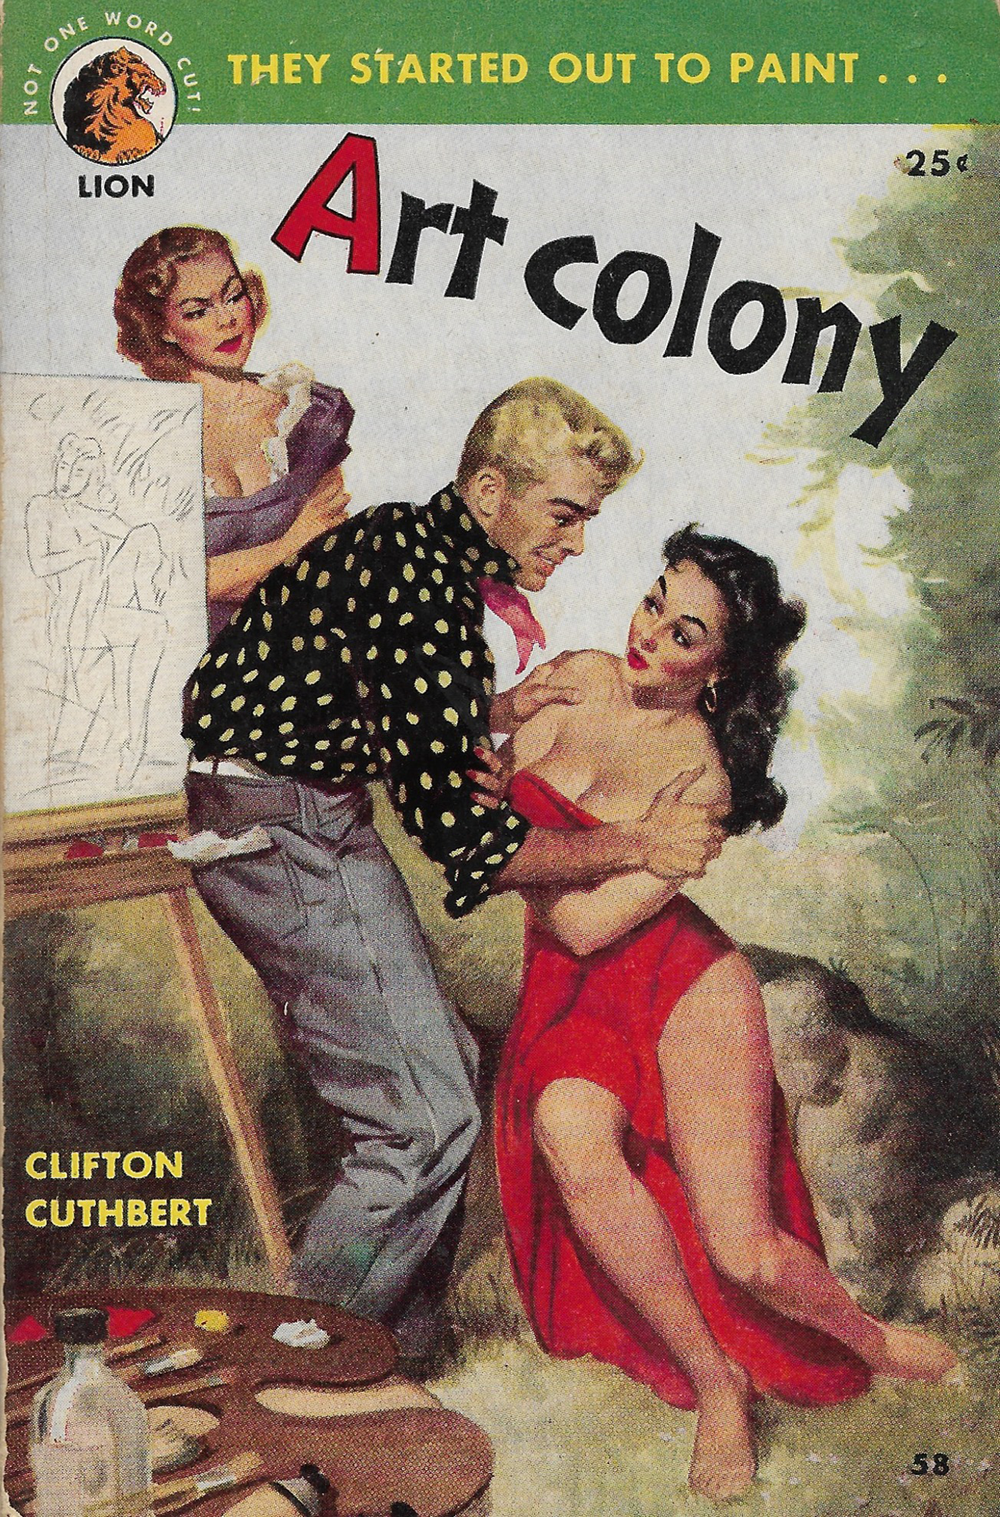 The Art Colony - They Came To Paint